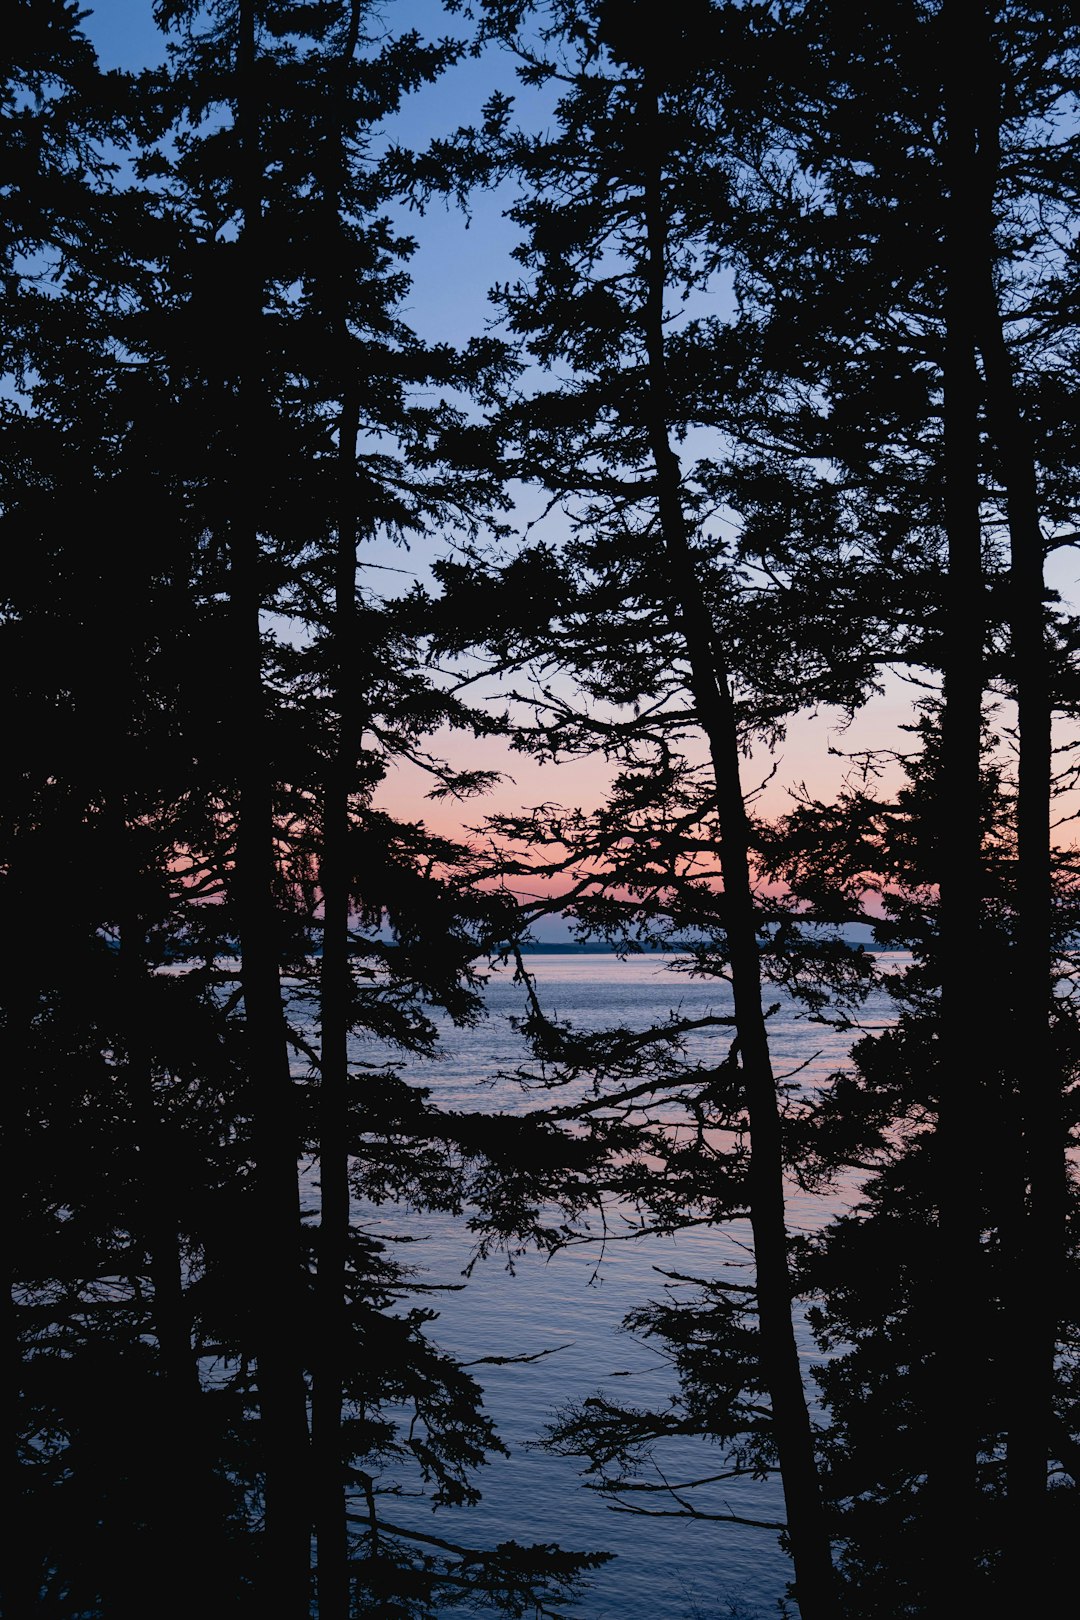 silhouette of trees near body of water during daytime